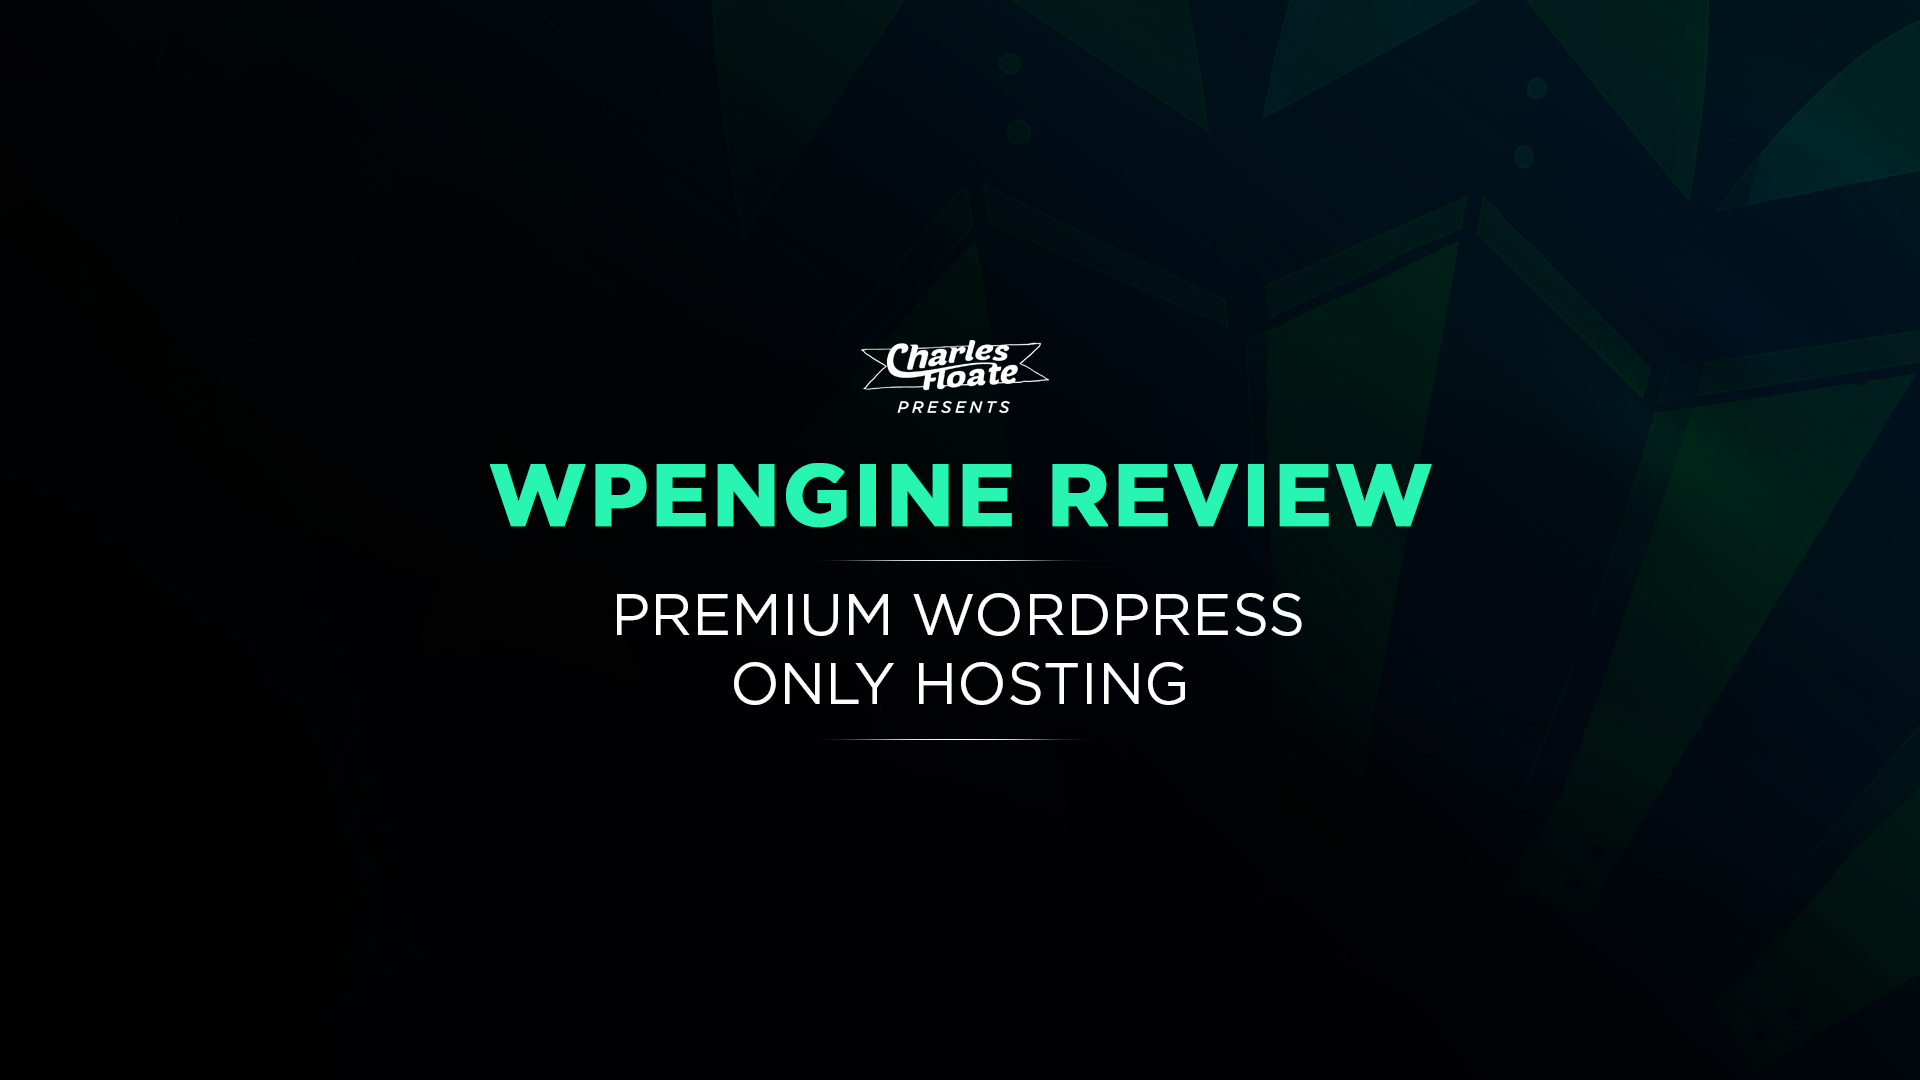 WordPress Hosting Outlet Refer A Friend Code February